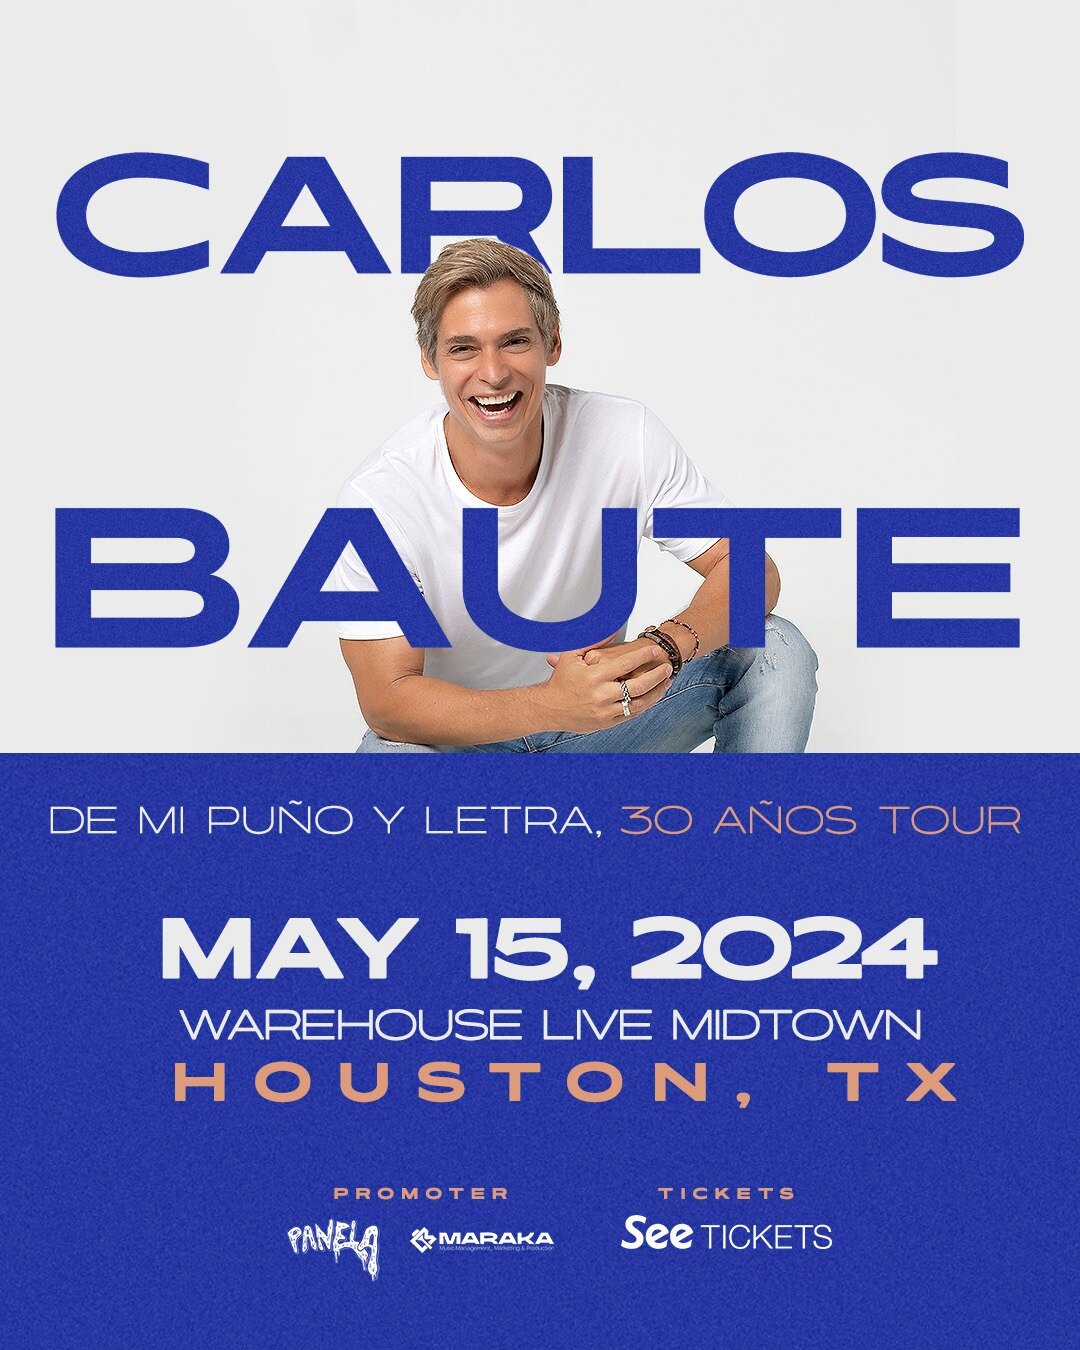 🎤 Now Announcing @carlos_baute 🇻🇪 coming to Houston May 15th.  Artist Presale on sale 3/27. General public on sale 3/29. For more information go to warehouselivemidtown.com
.
.
#carlosbaute #houston #warehouselivemidtown